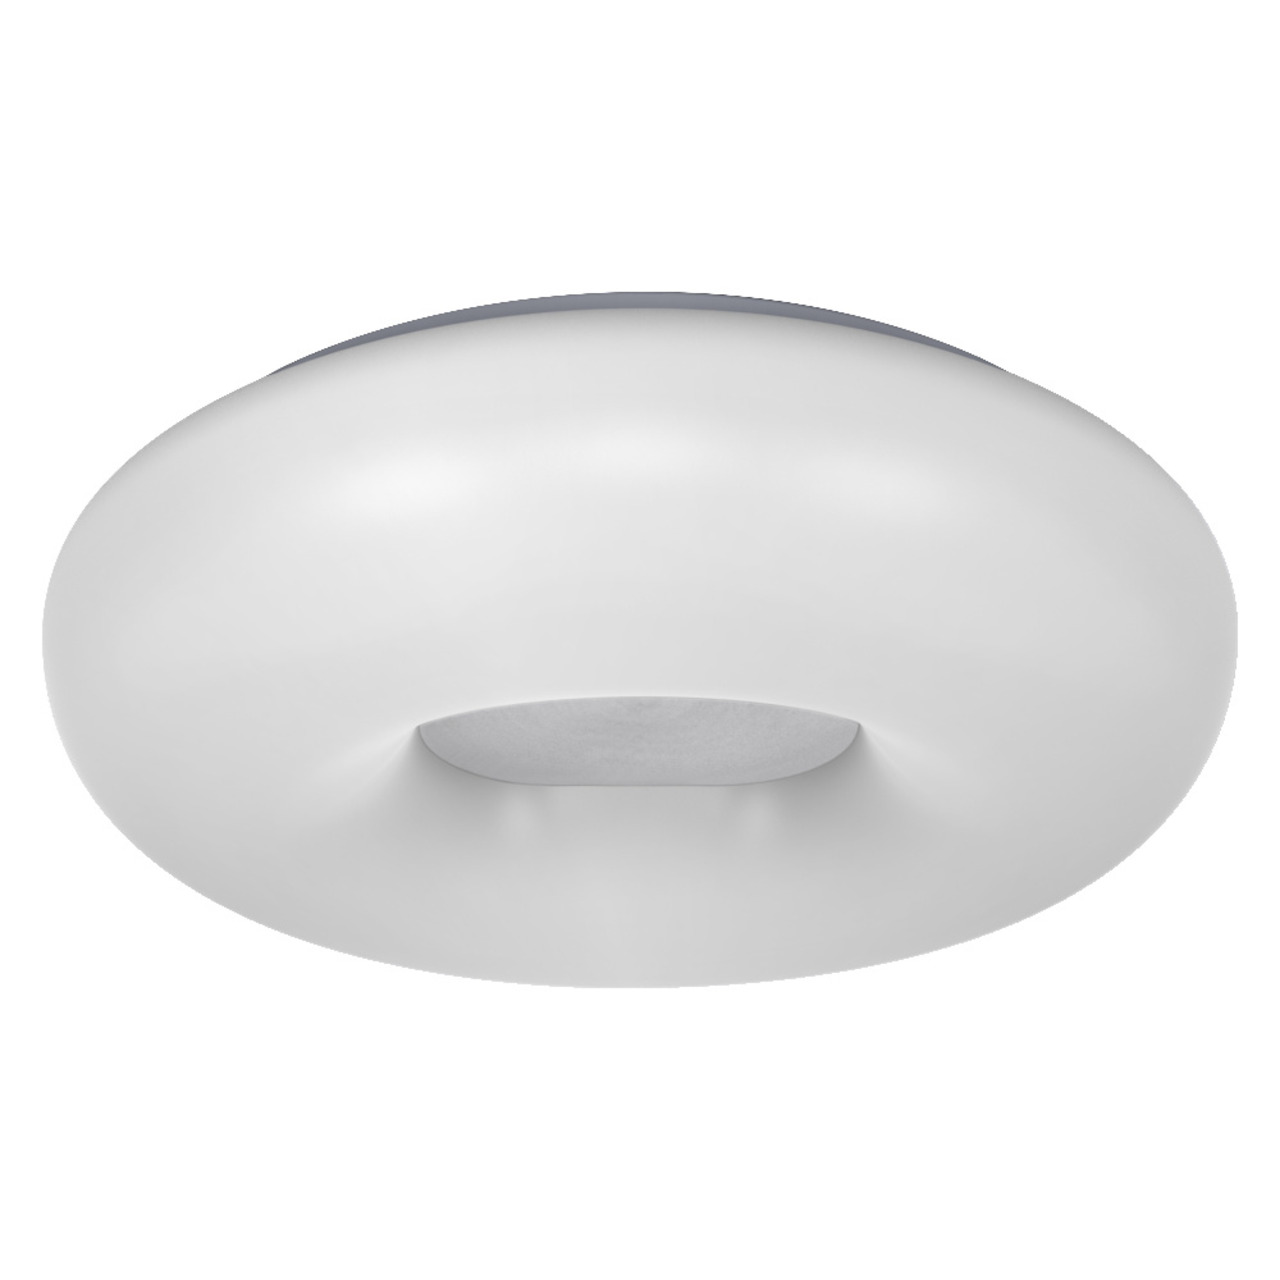 LEDVANCE SMART+ WiFi 26-W-LED-Deckenleuchte ORBIS DONUT- 2400 lm- Tunable White- dimmbar